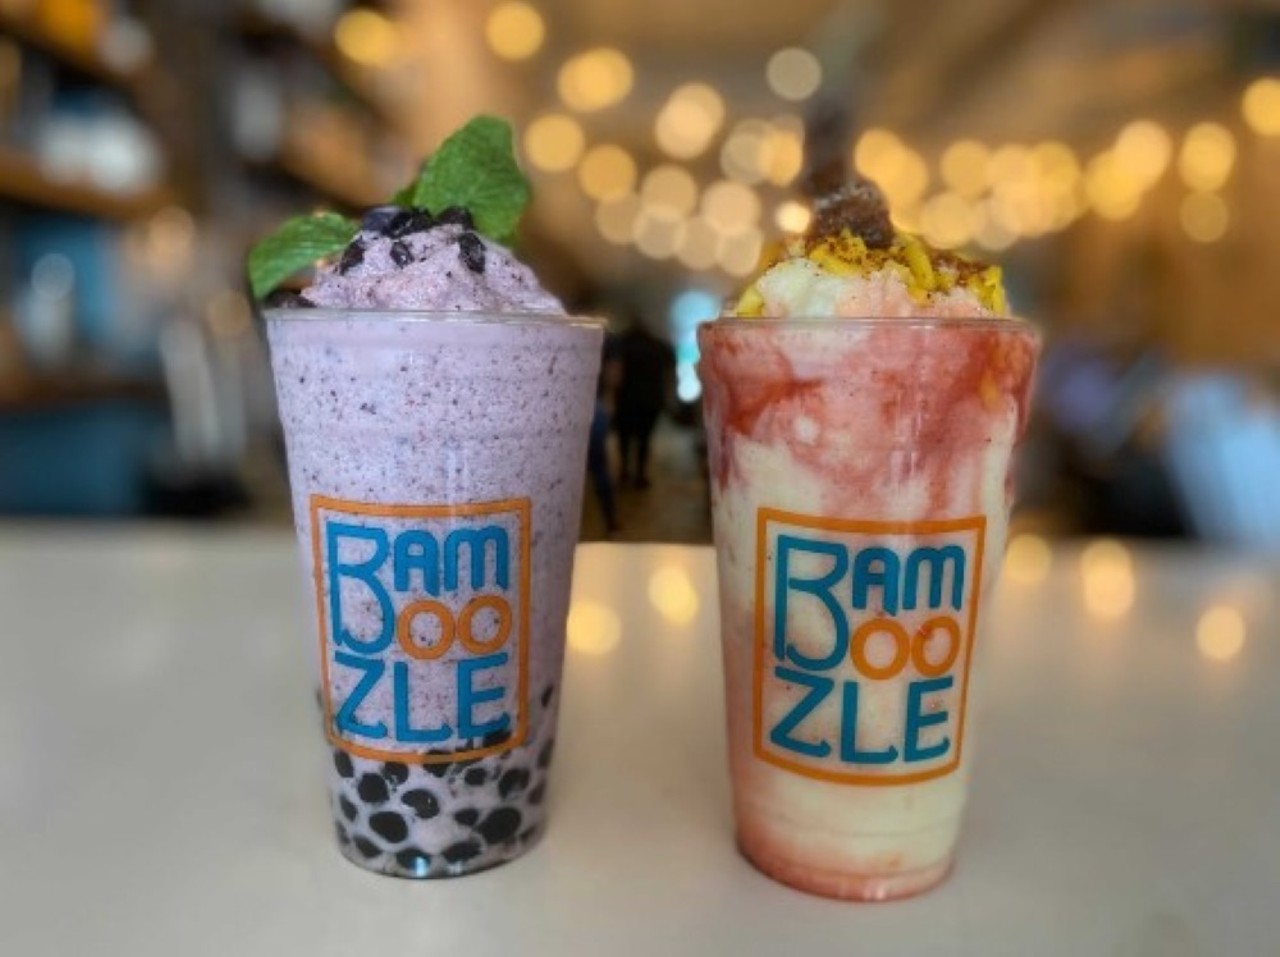 Bamboozle
109 N 12th St., Tampa
While downtown Tampa certainly misses its go-to boba fix, Bamboozle’s Channelside location still dishes out a variety of drinks alongside a menu of healthy Vietnamese favorites. Taro, coconut and matcha milk teas are joined by fresh smoothies and iced coffees, with a solid variety of bobas and jellies to match. This Vietnamese restaurant gets a few bonus points for its variety of dairy-free boba drinks, too. 
Photo via  Bamboozle/Instagram